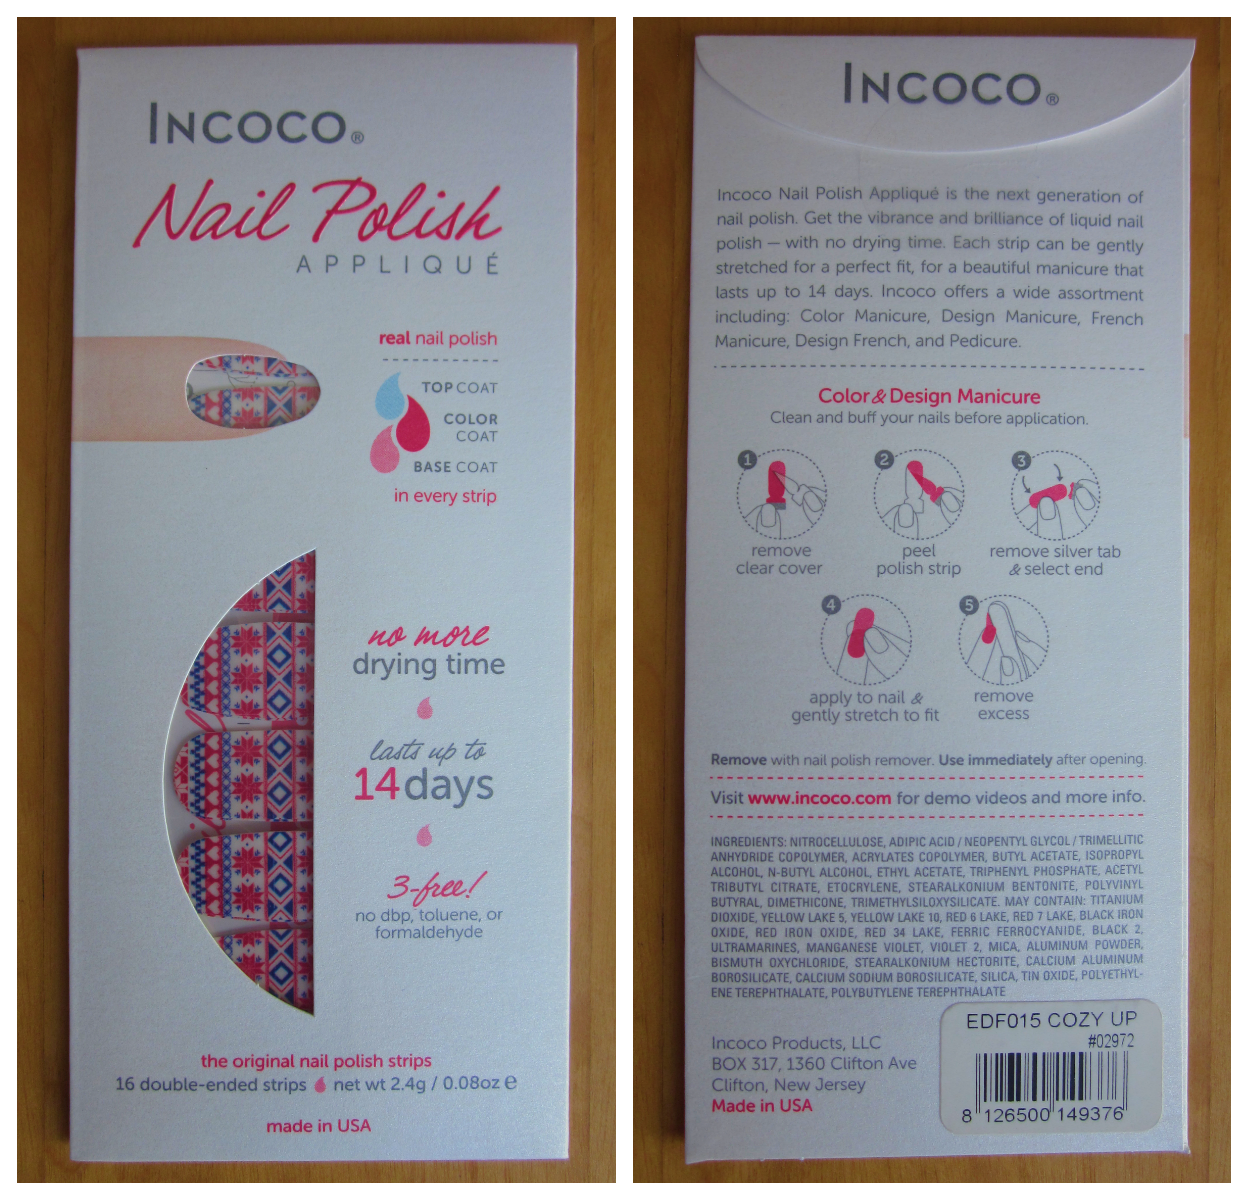 Incoco Nail Polish Appliques - Review & Giveaway - Krissy Deane